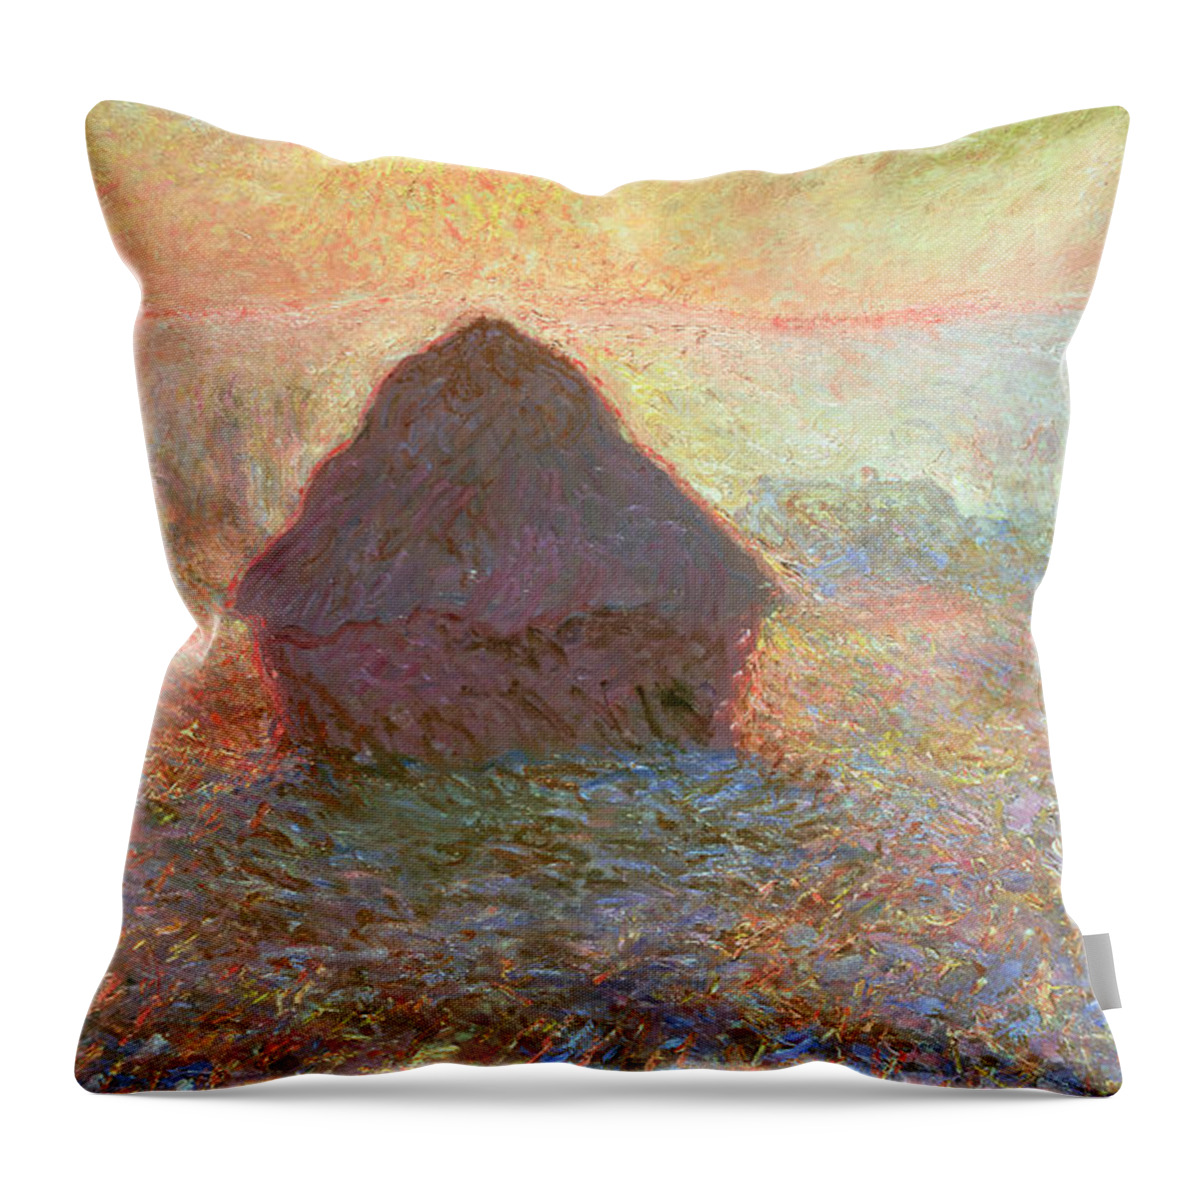 Farm Throw Pillow featuring the painting Sun in the Mist by Claude Monet